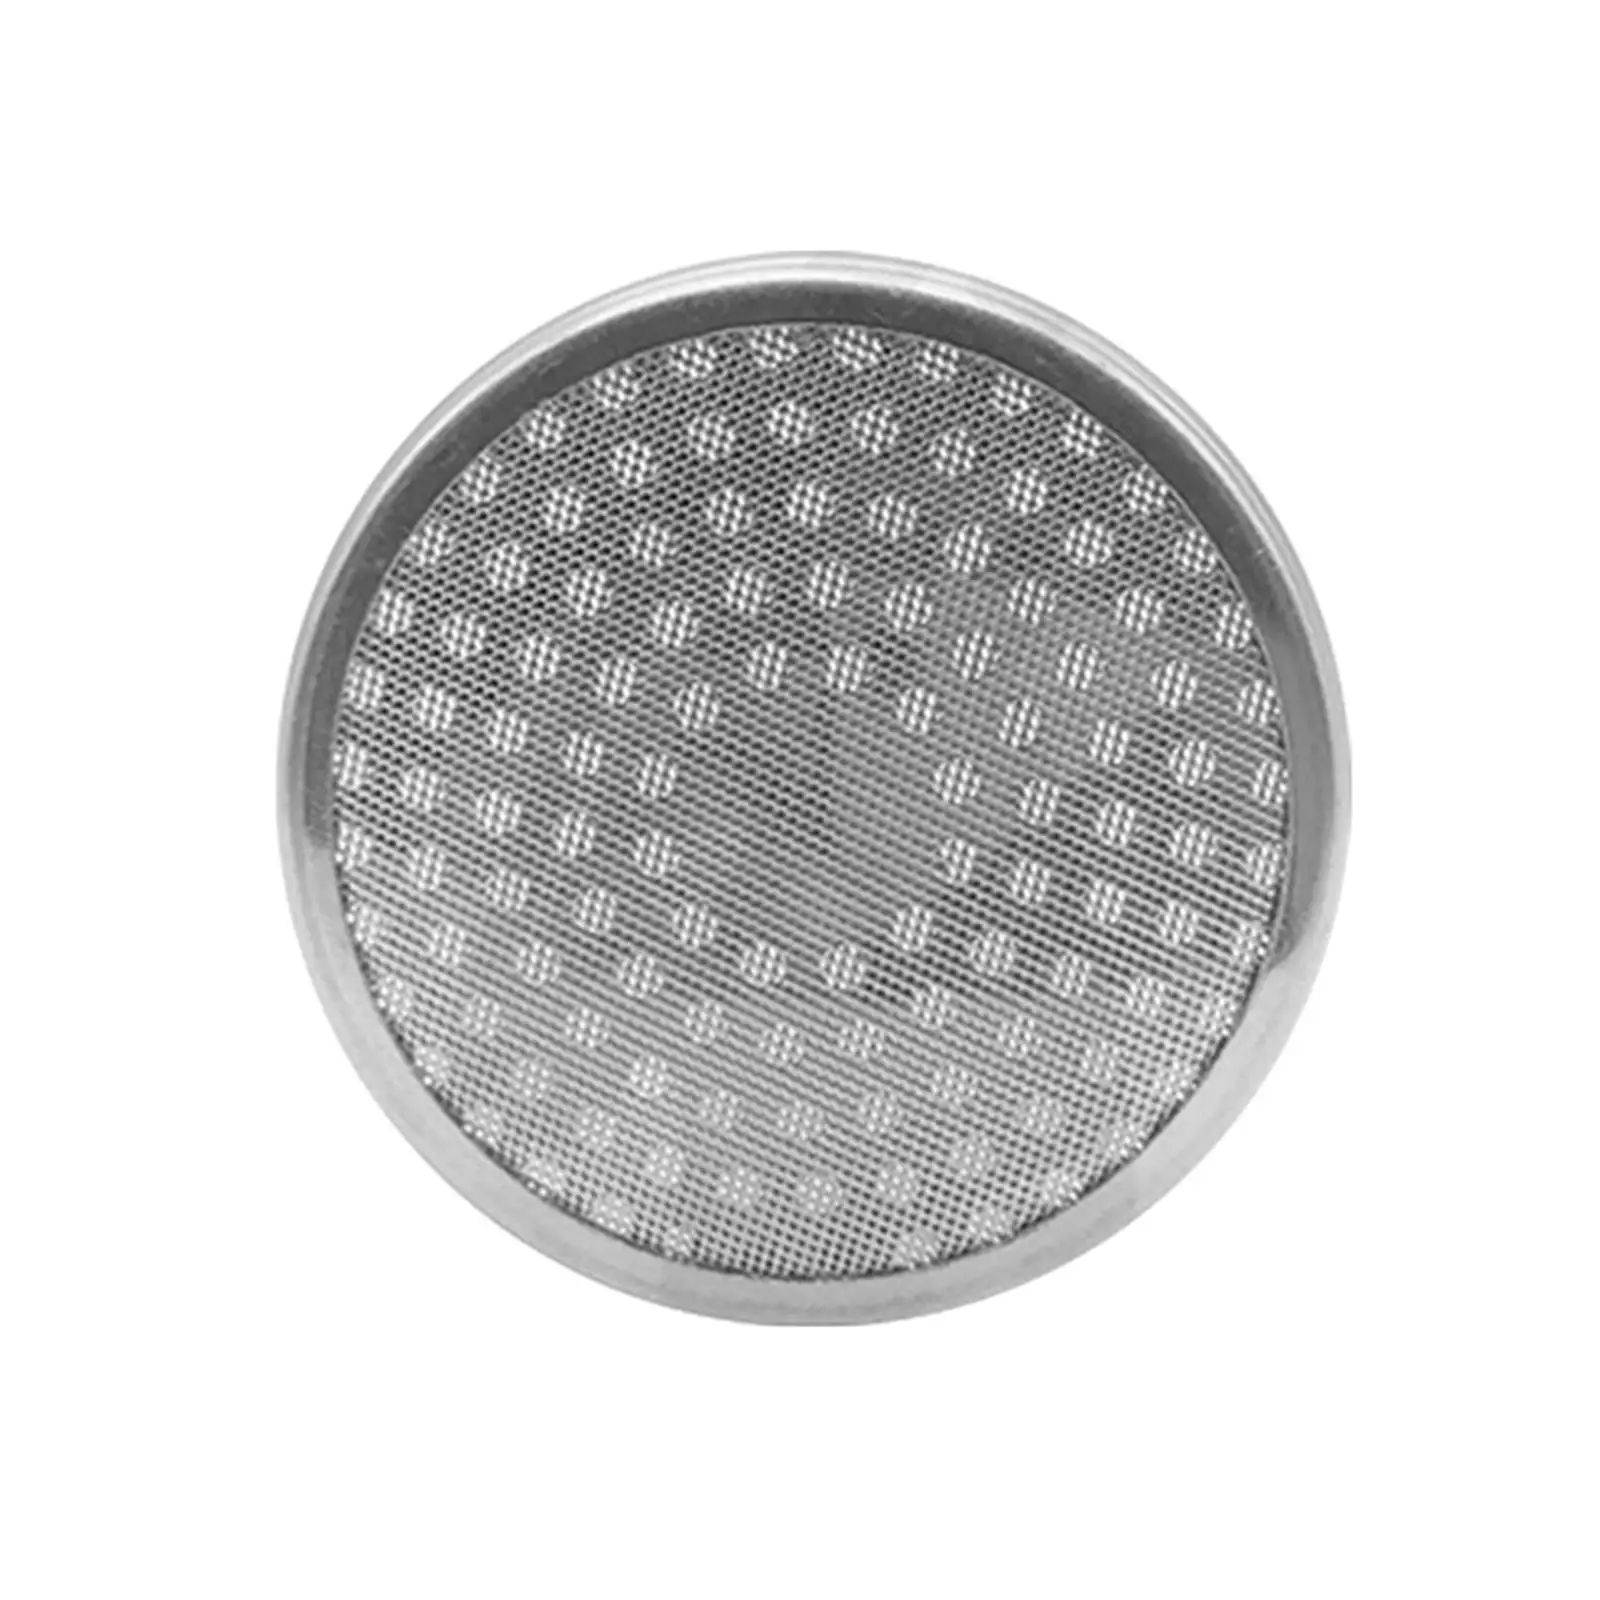 group Head Shower Screen Filter Barista Reusable 304 Stainless Steel for Espresso machine Maker Accessory Parts